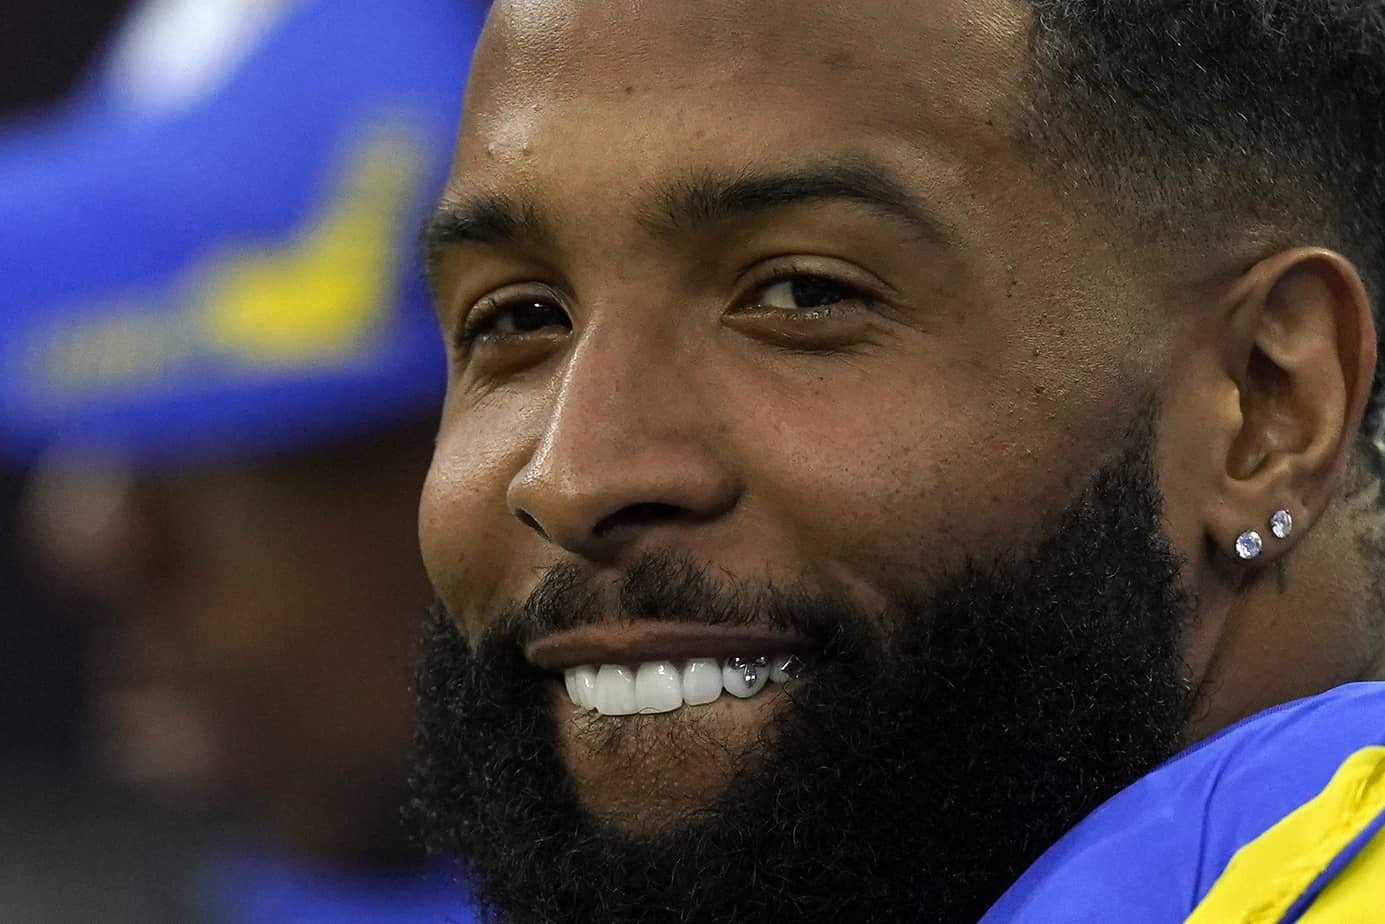 Odell Beckham Jr's former Cleveland Browns teammates flocked to social media to react to his big performance in the Rams playoff game